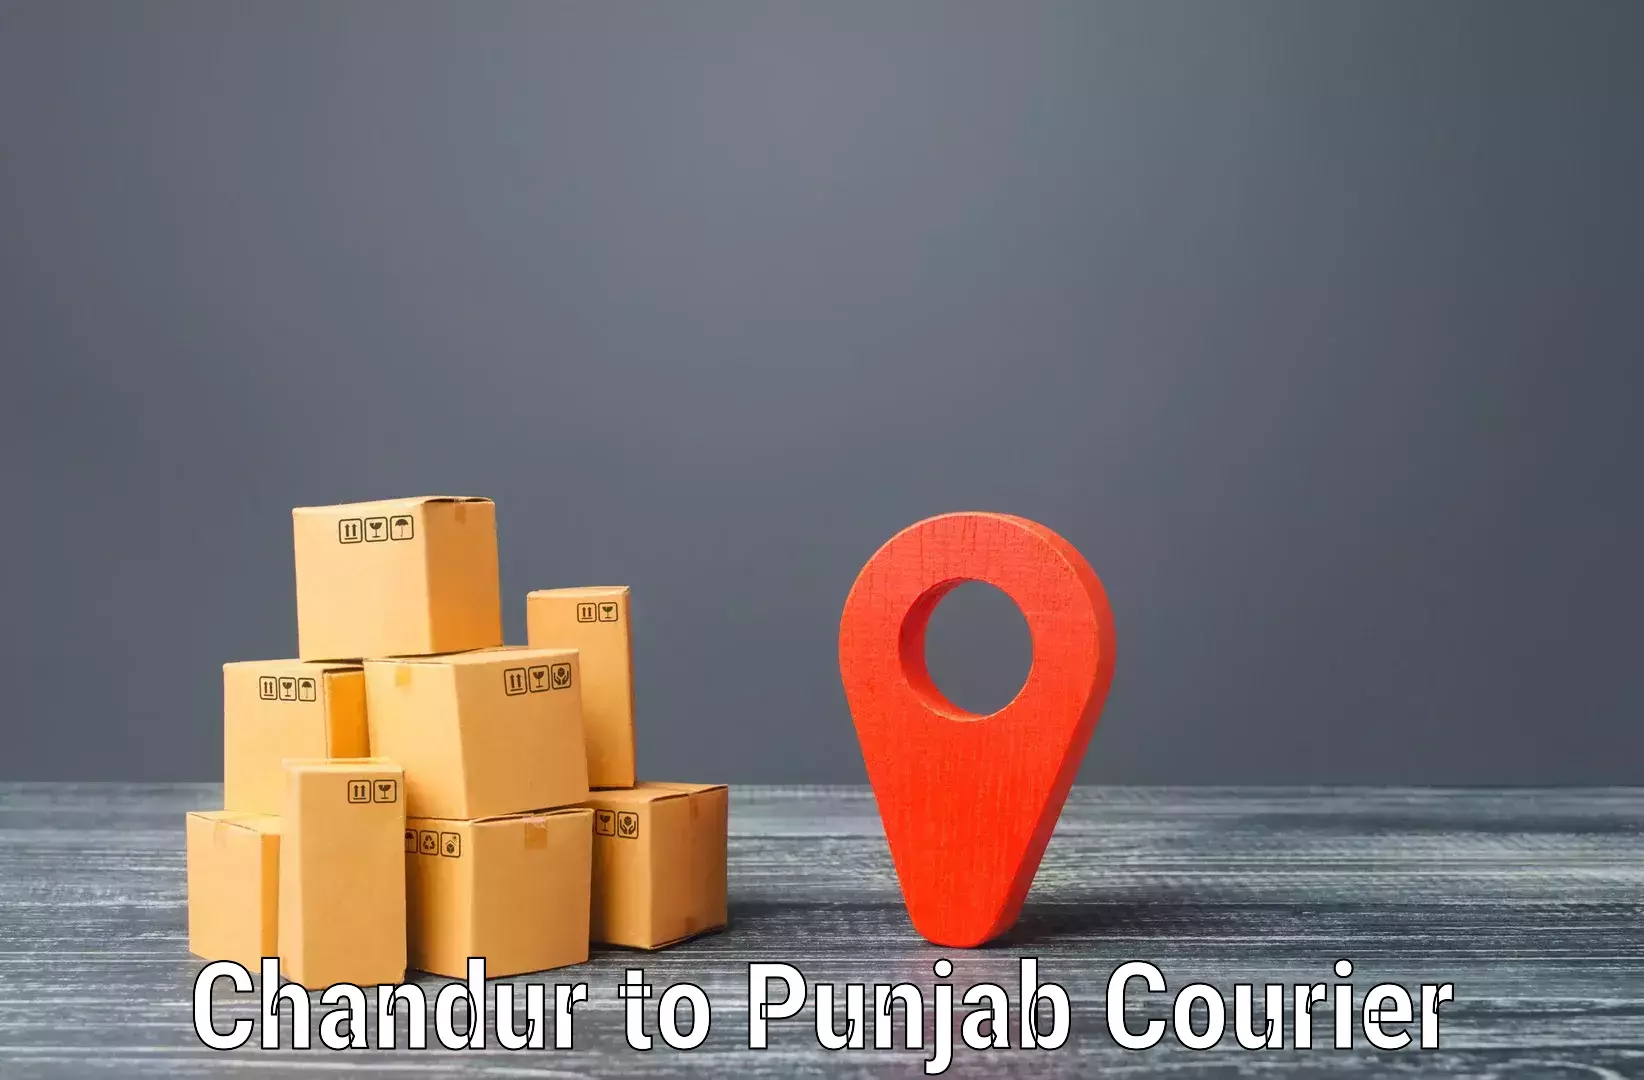 Parcel handling and care Chandur to Patiala